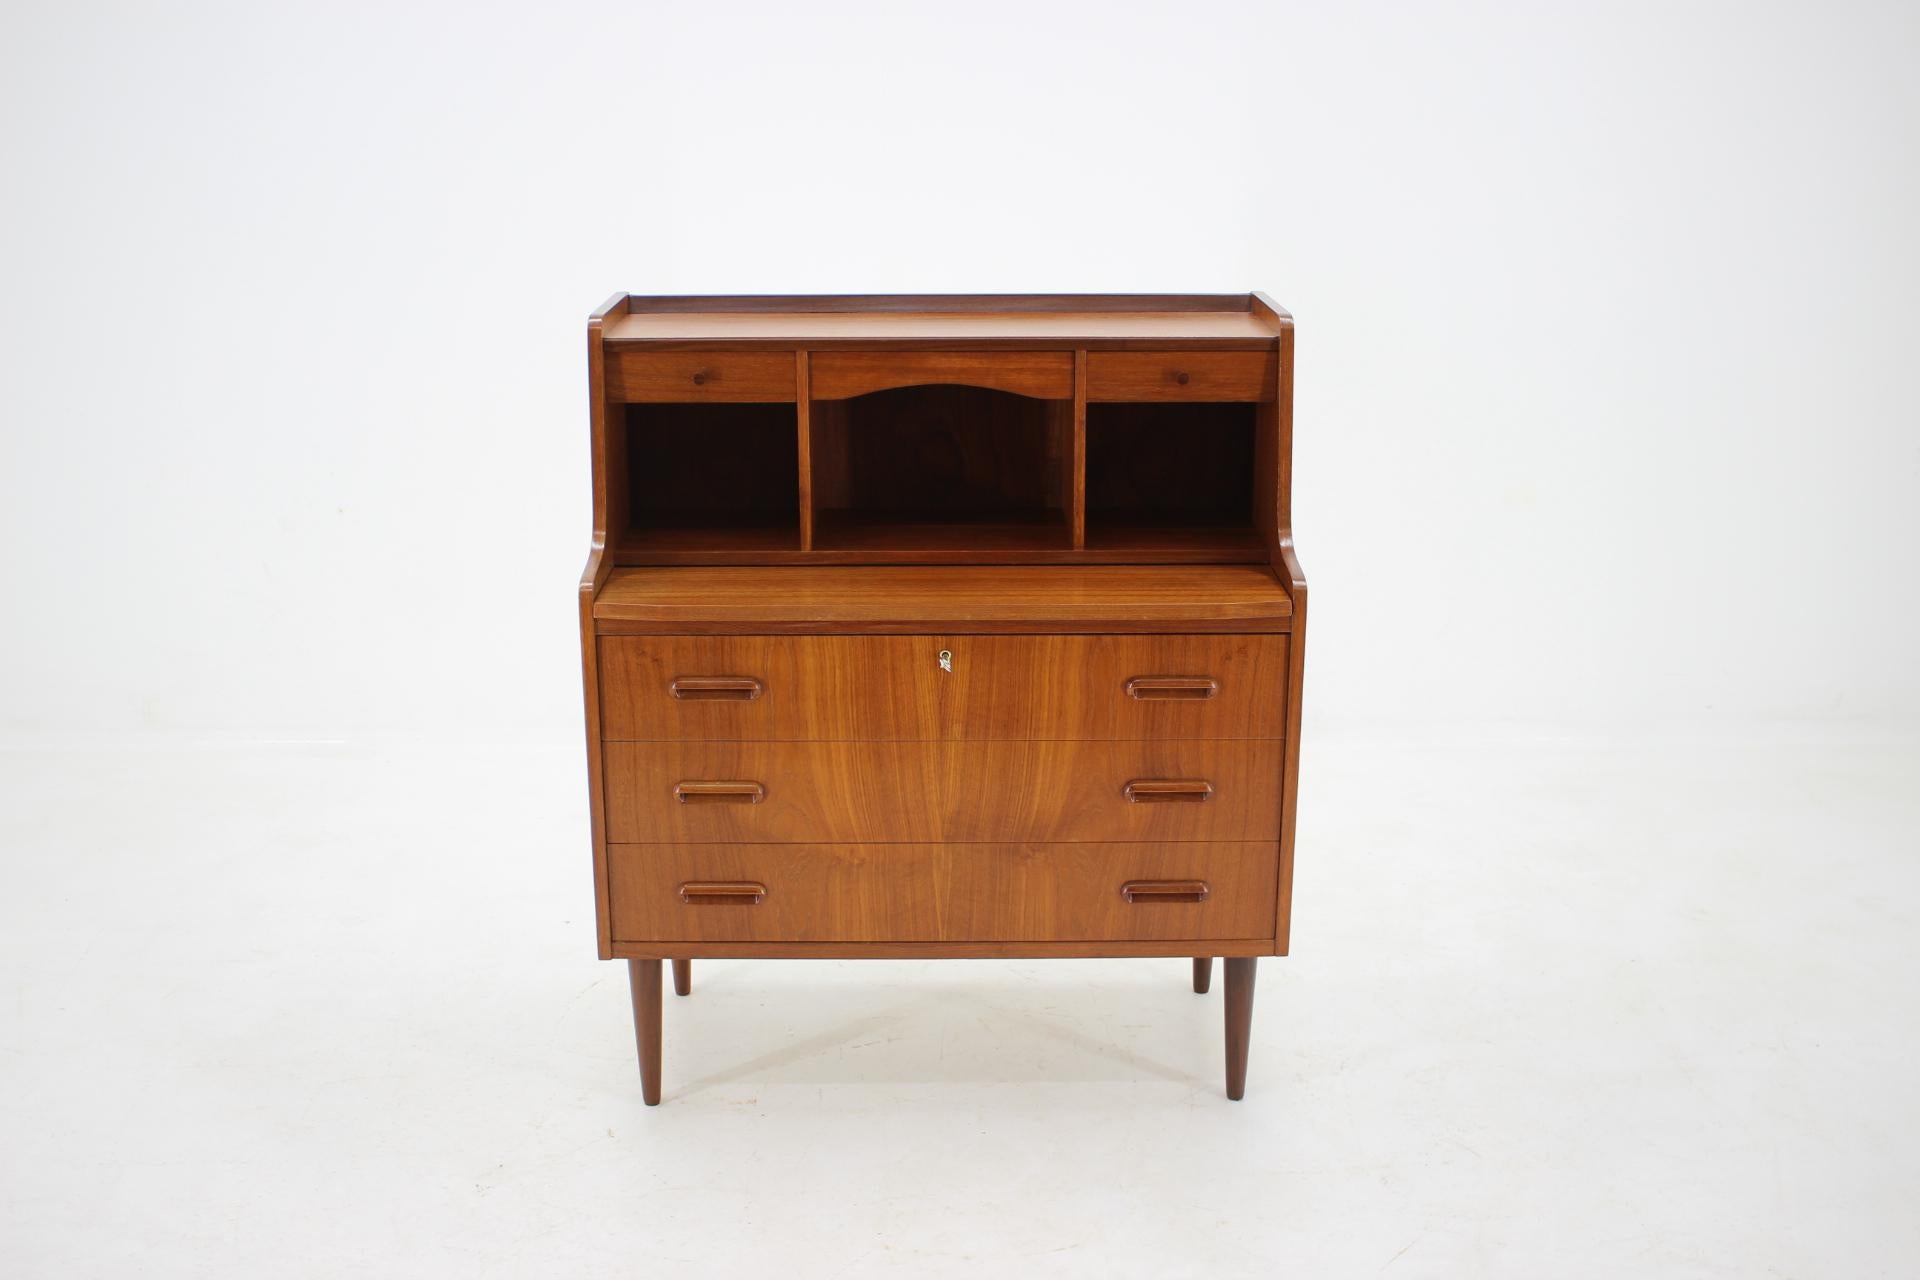 - The extendable writing area desk can be extended up to 59 cm 
- This item was carefully refurbished.